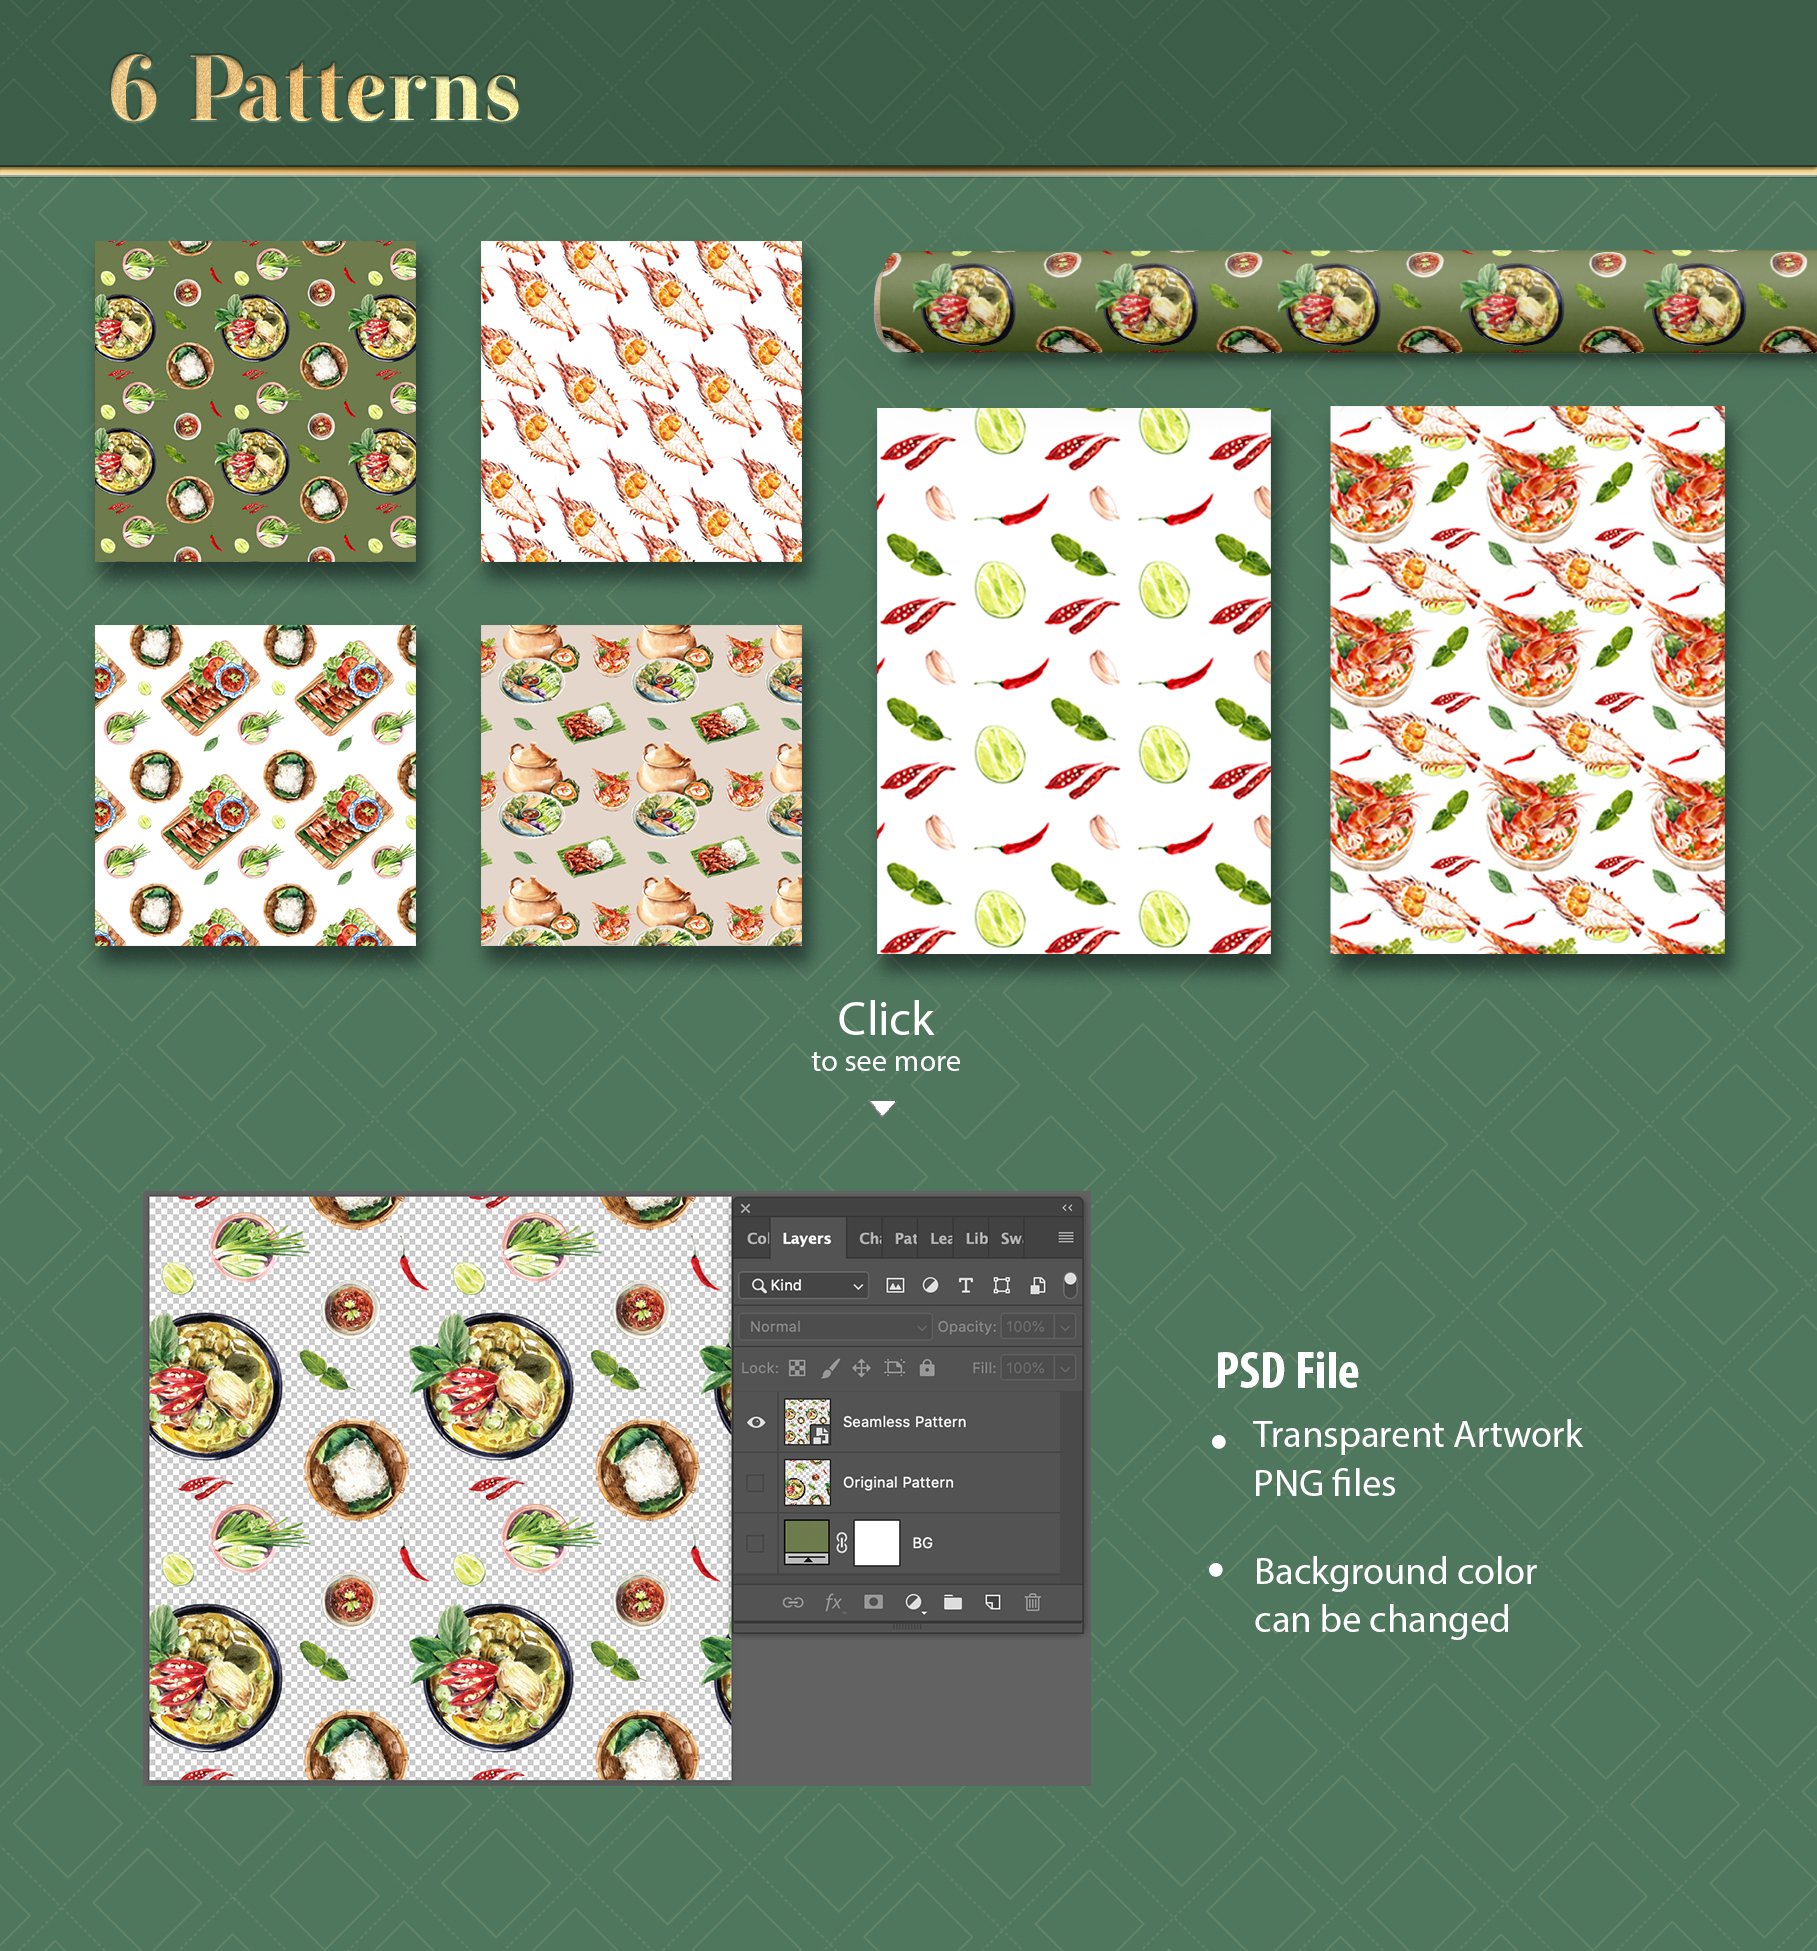 Thai food patterns for you.